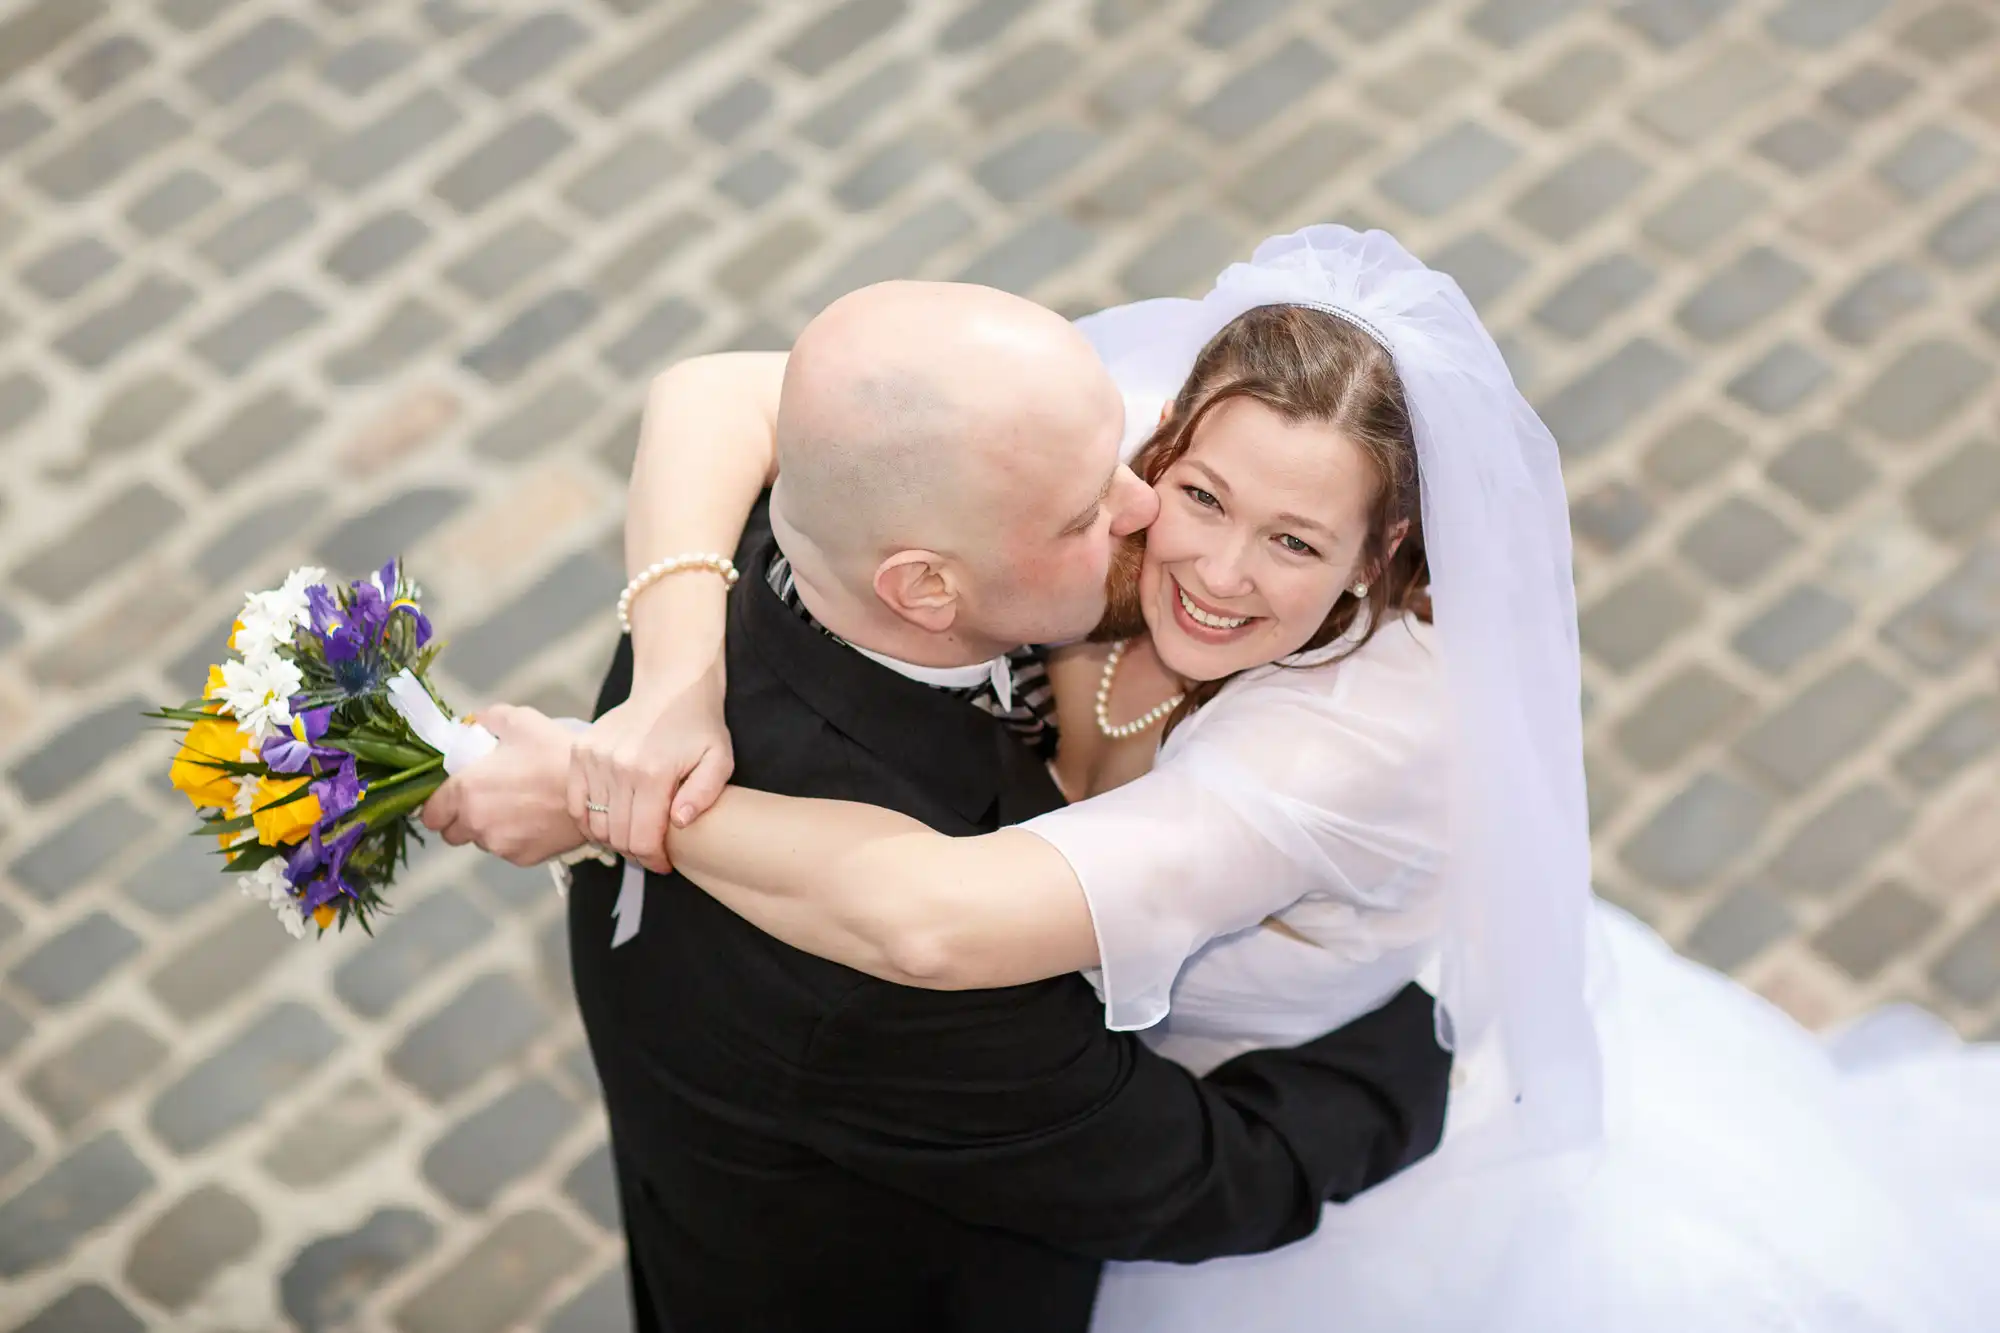 Bald groom in black suit kissing a smiling bride in a white dress with a veil, holding a bouquet, from an overhead perspective on a cobblestone street.